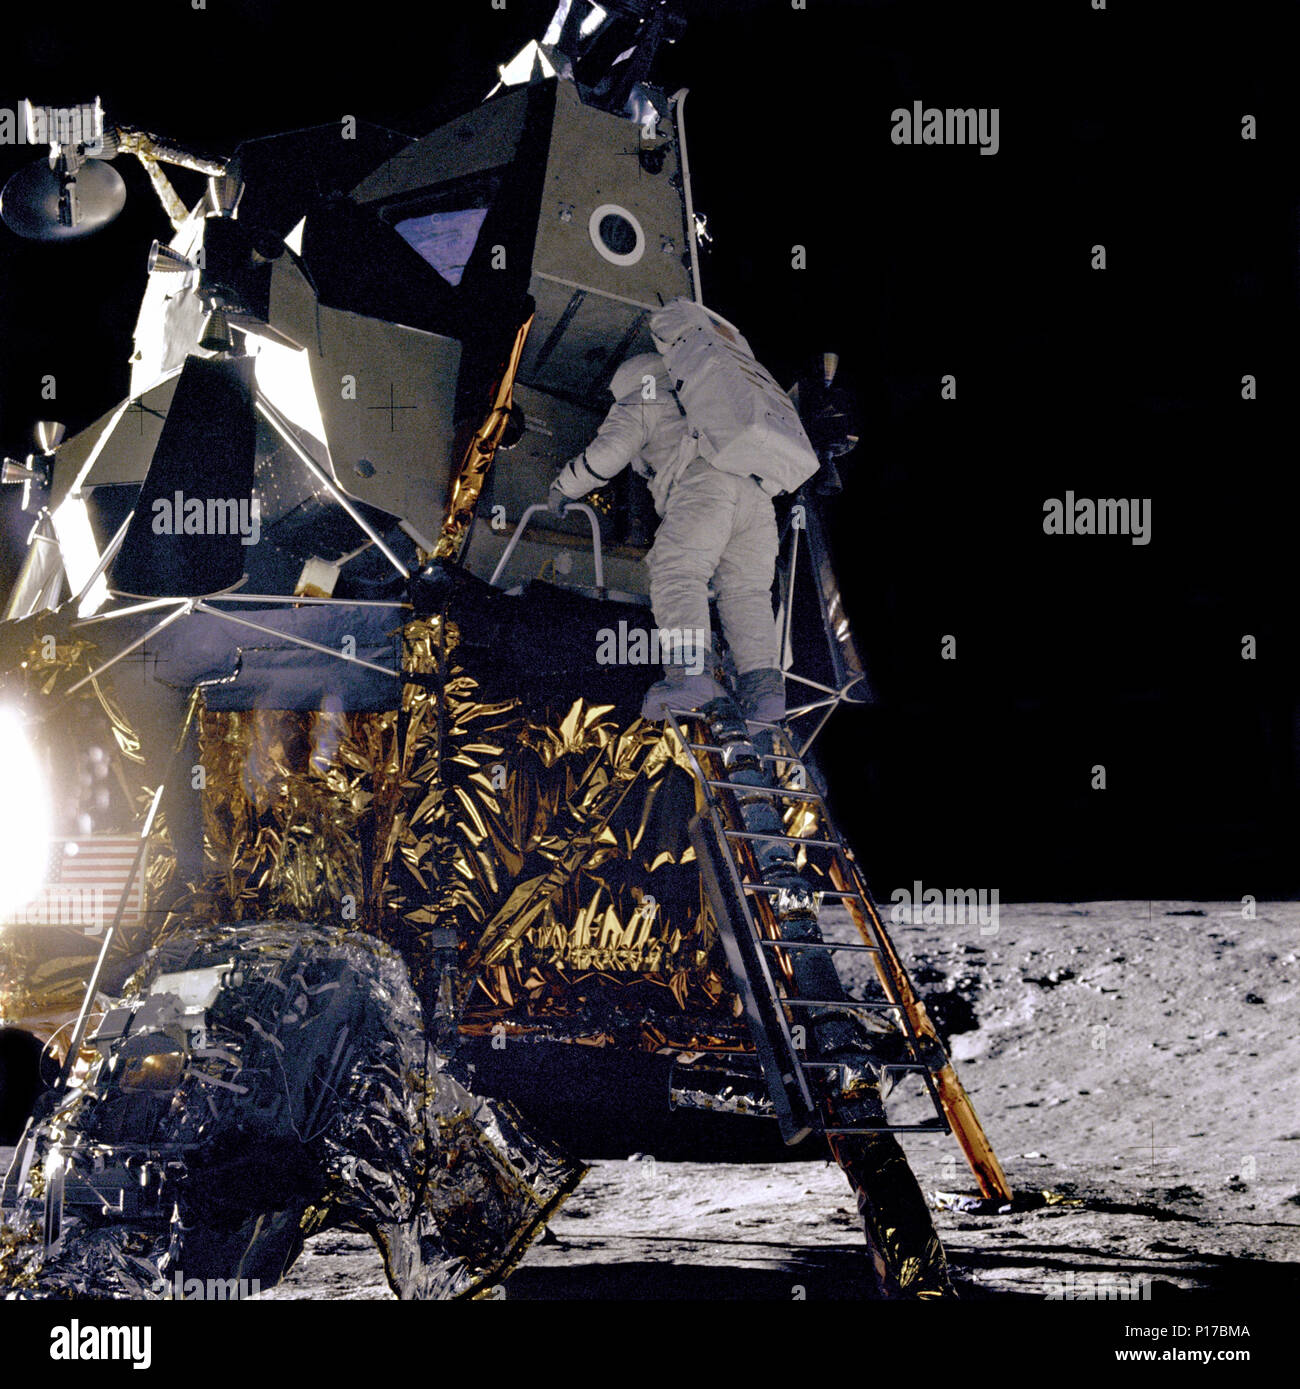 Alan L. Bean, Lunar Module pilot for the Apollo 12 mission, starts down the ladder of the Lunar Module (LM) 'Intrepid' to join astronaut Charles Conrad, Jr., mission Commander, on the lunar surface. Stock Photo